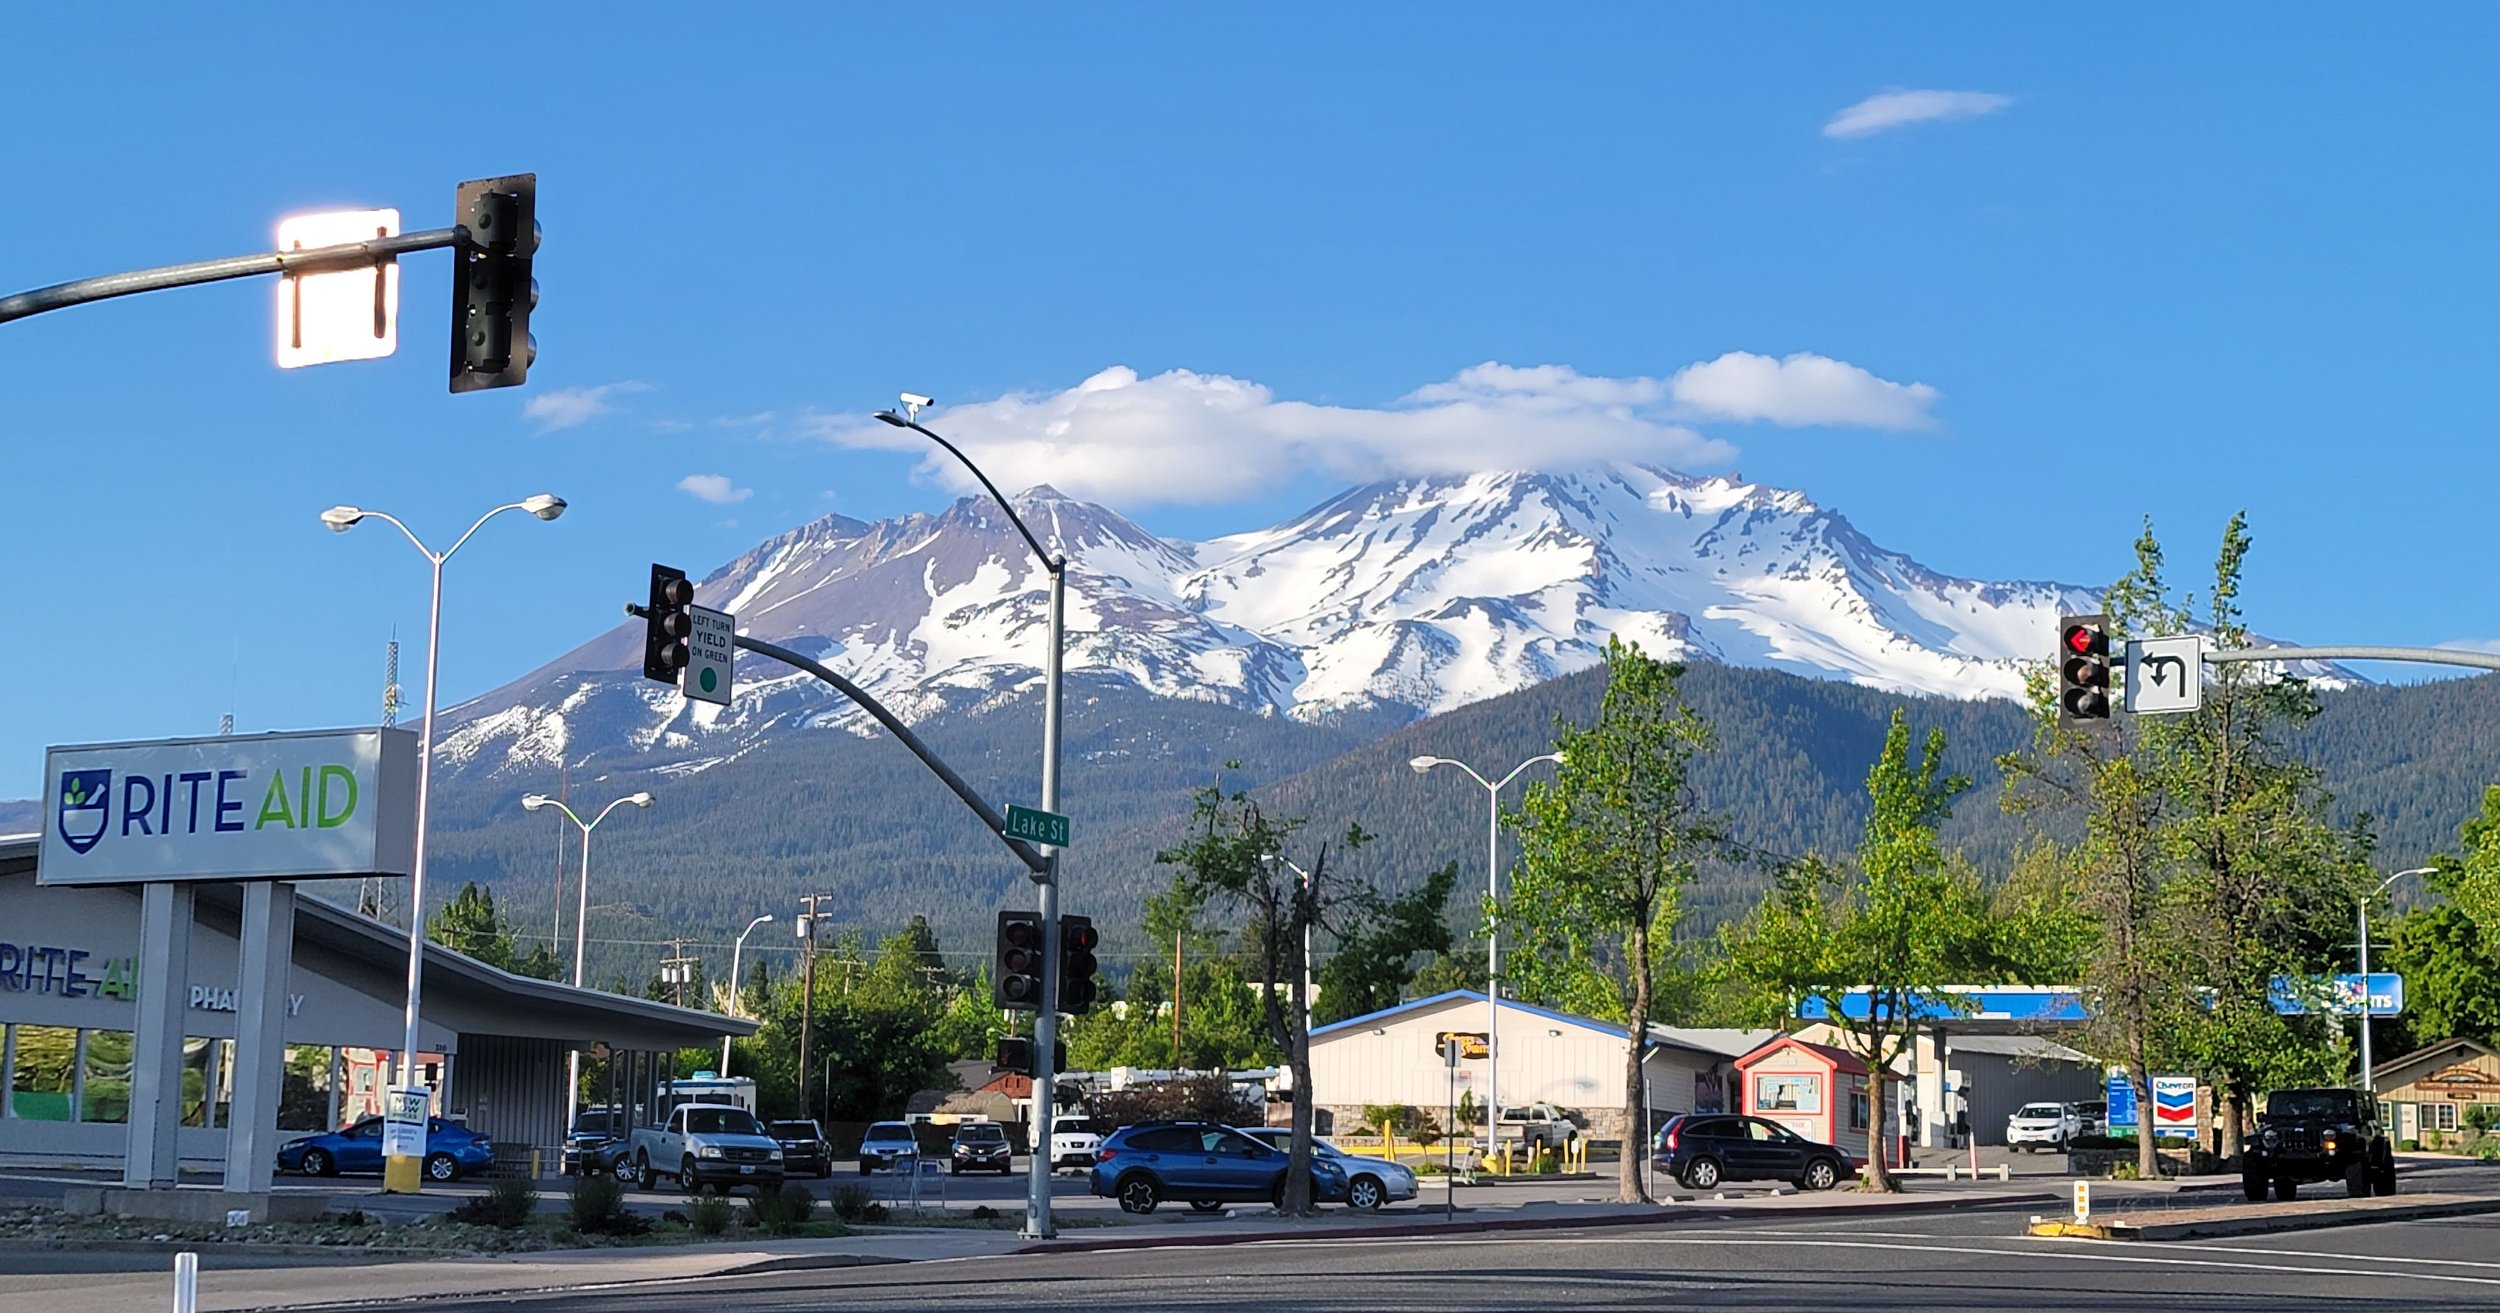 Stayed in Shasta City, right at the base. Mt. Shasta is the 5th highest peak in the USA and definitely the most impressive I've seen as it just towers above everything else around it.